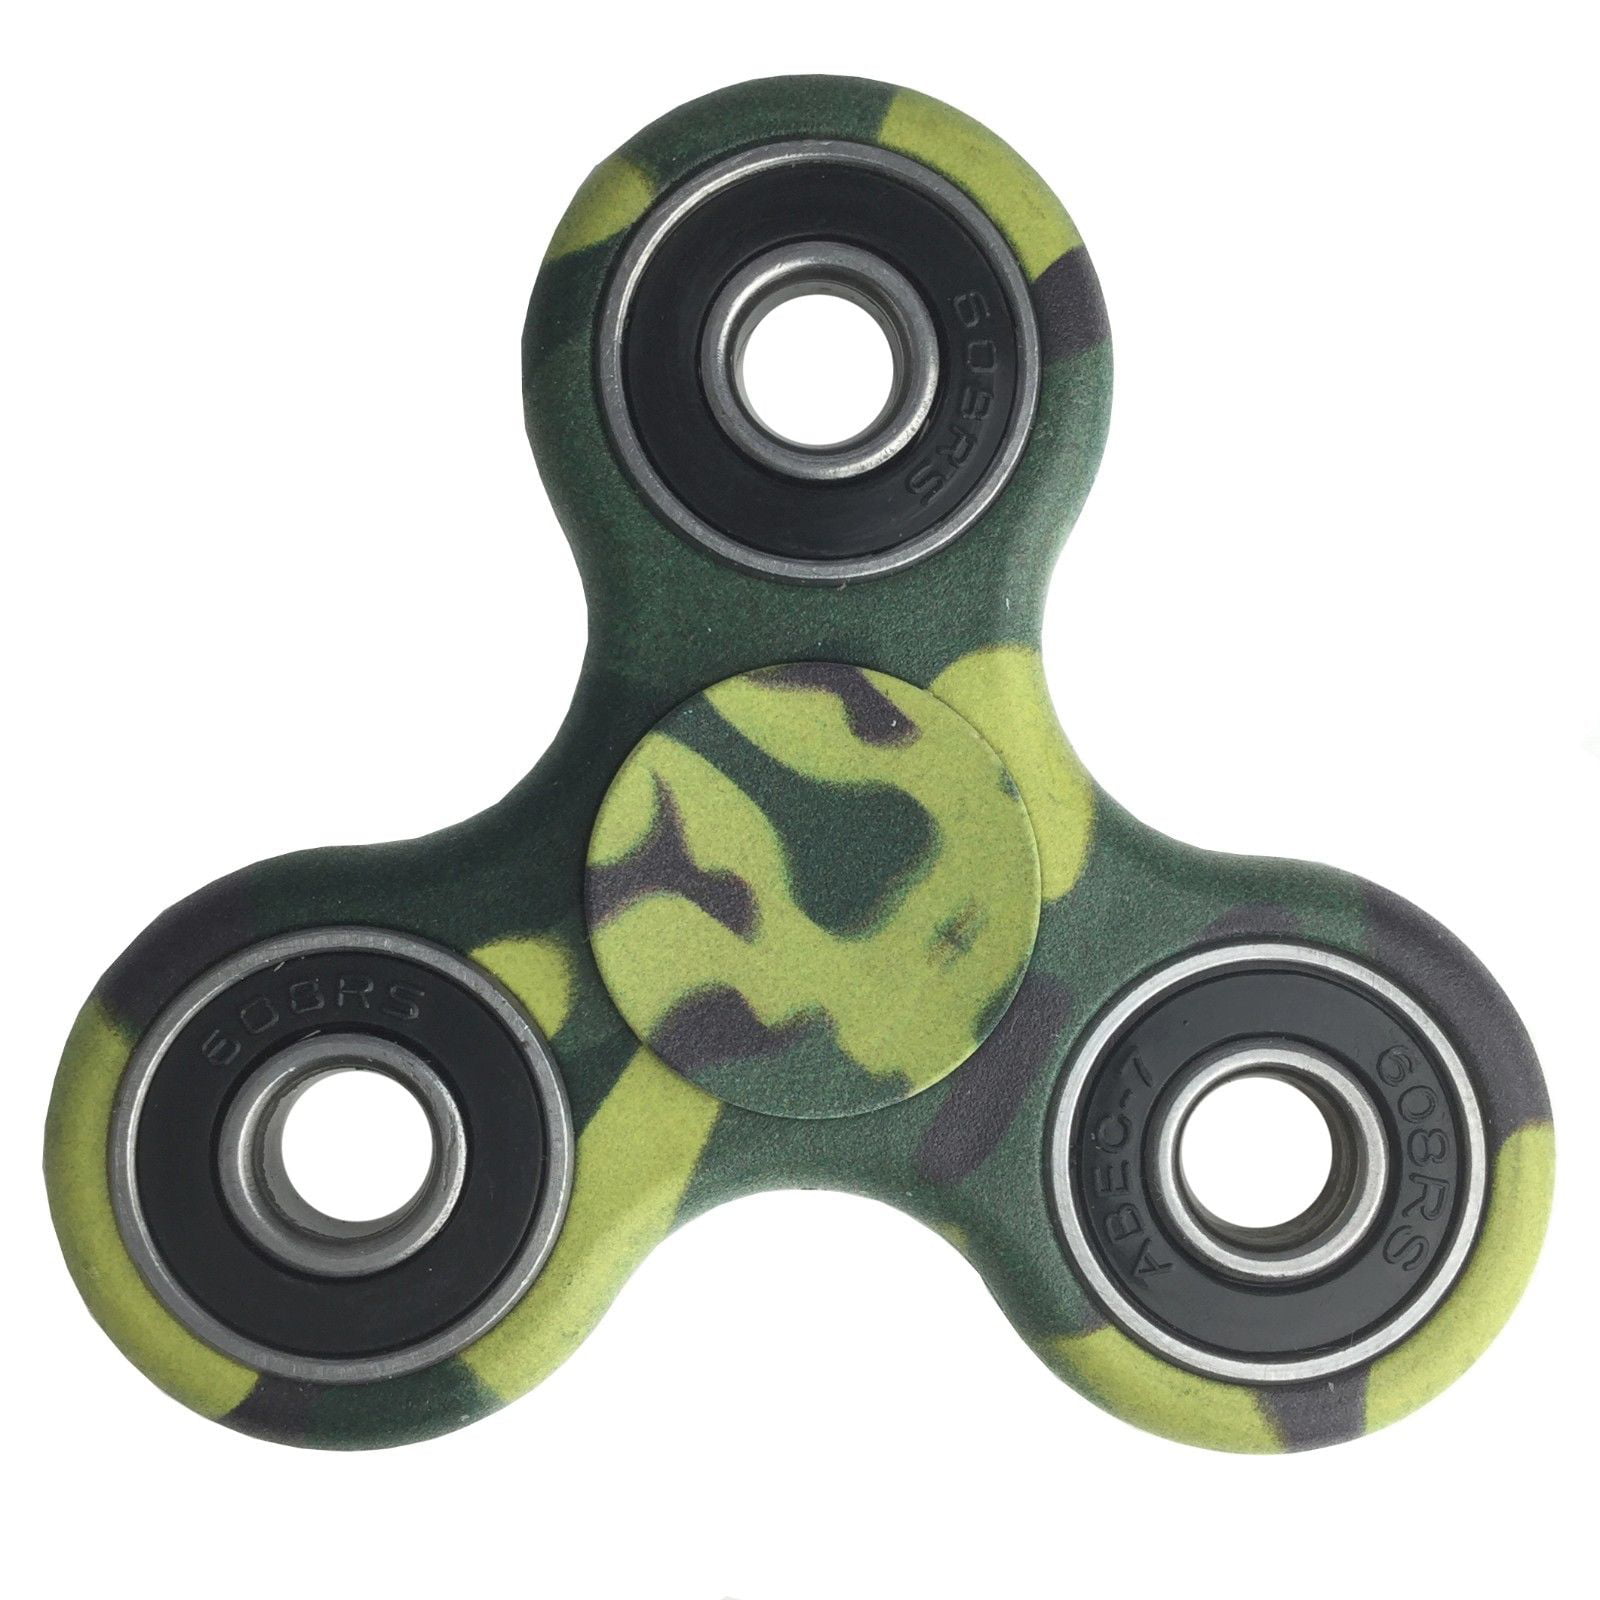 Hot Hand Spinner Colorful Camo Fidget Tri Hand Spinning Finger Toy Gift US 